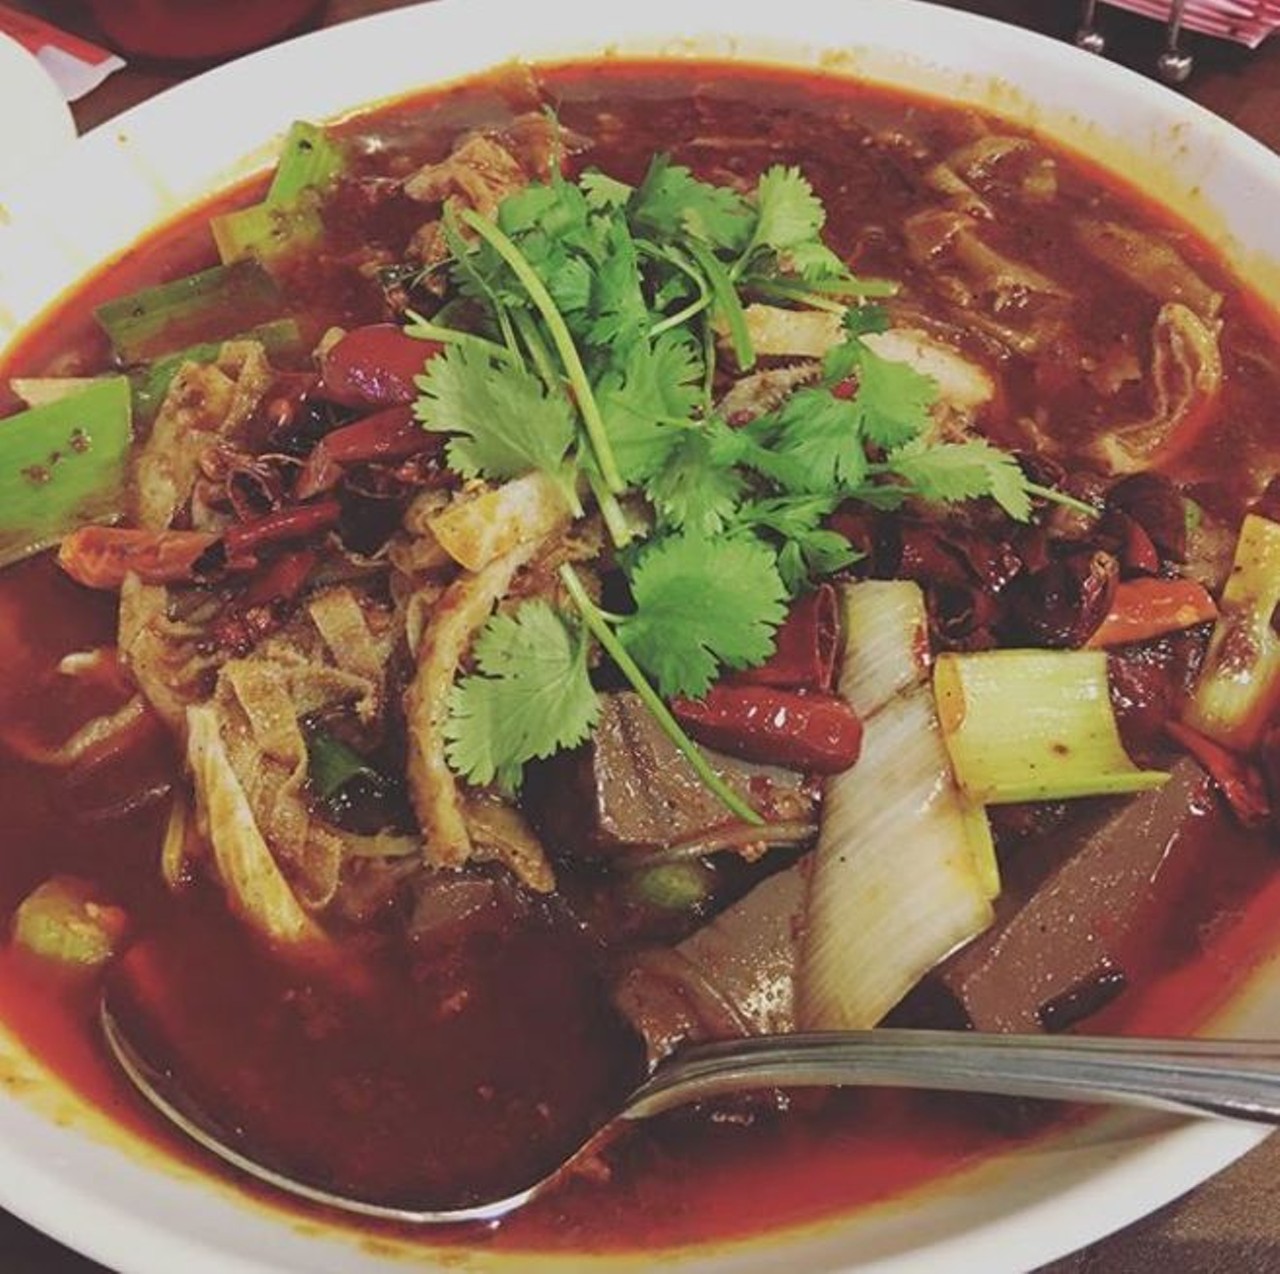 Sichuan Cuisine
2347 NW Military Hwy., (210) 525-8118
The OG Sichuan spot in SA is still going strong. Try the challenging sliced pig&#146;s ear or duck tongues with jalape&ntilde;o before retreating to the likes of the (also very good) stir-fried lamb with cumin.
Photo via Instagram,  w0419